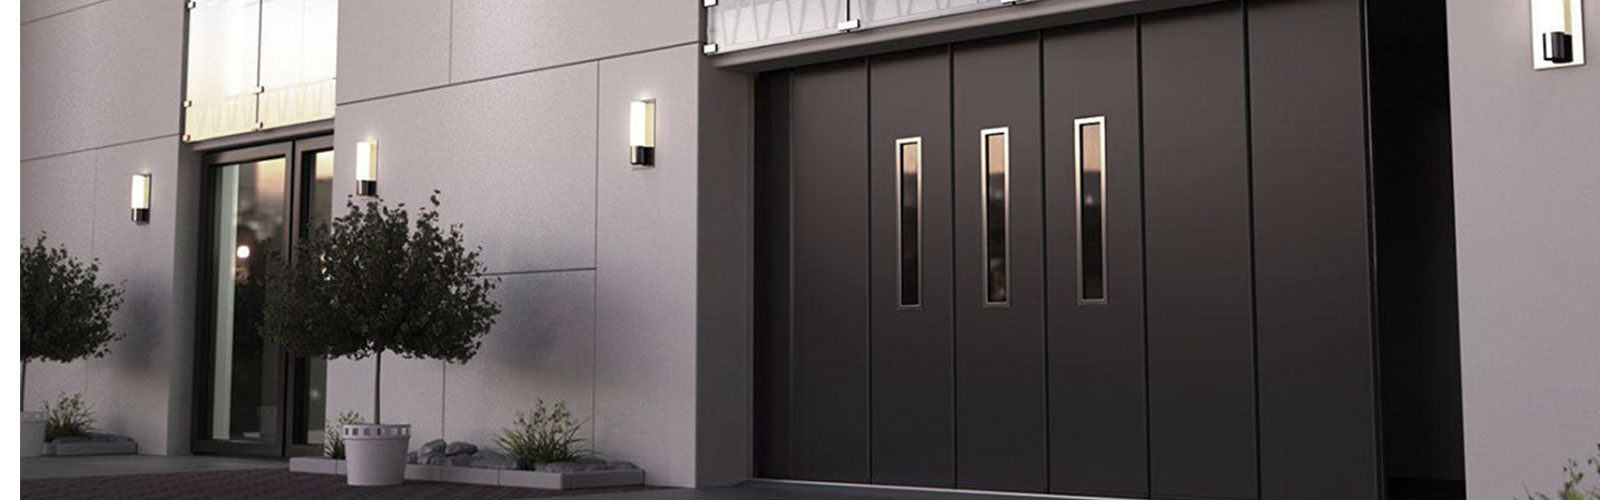 Garage doors at competitive prices